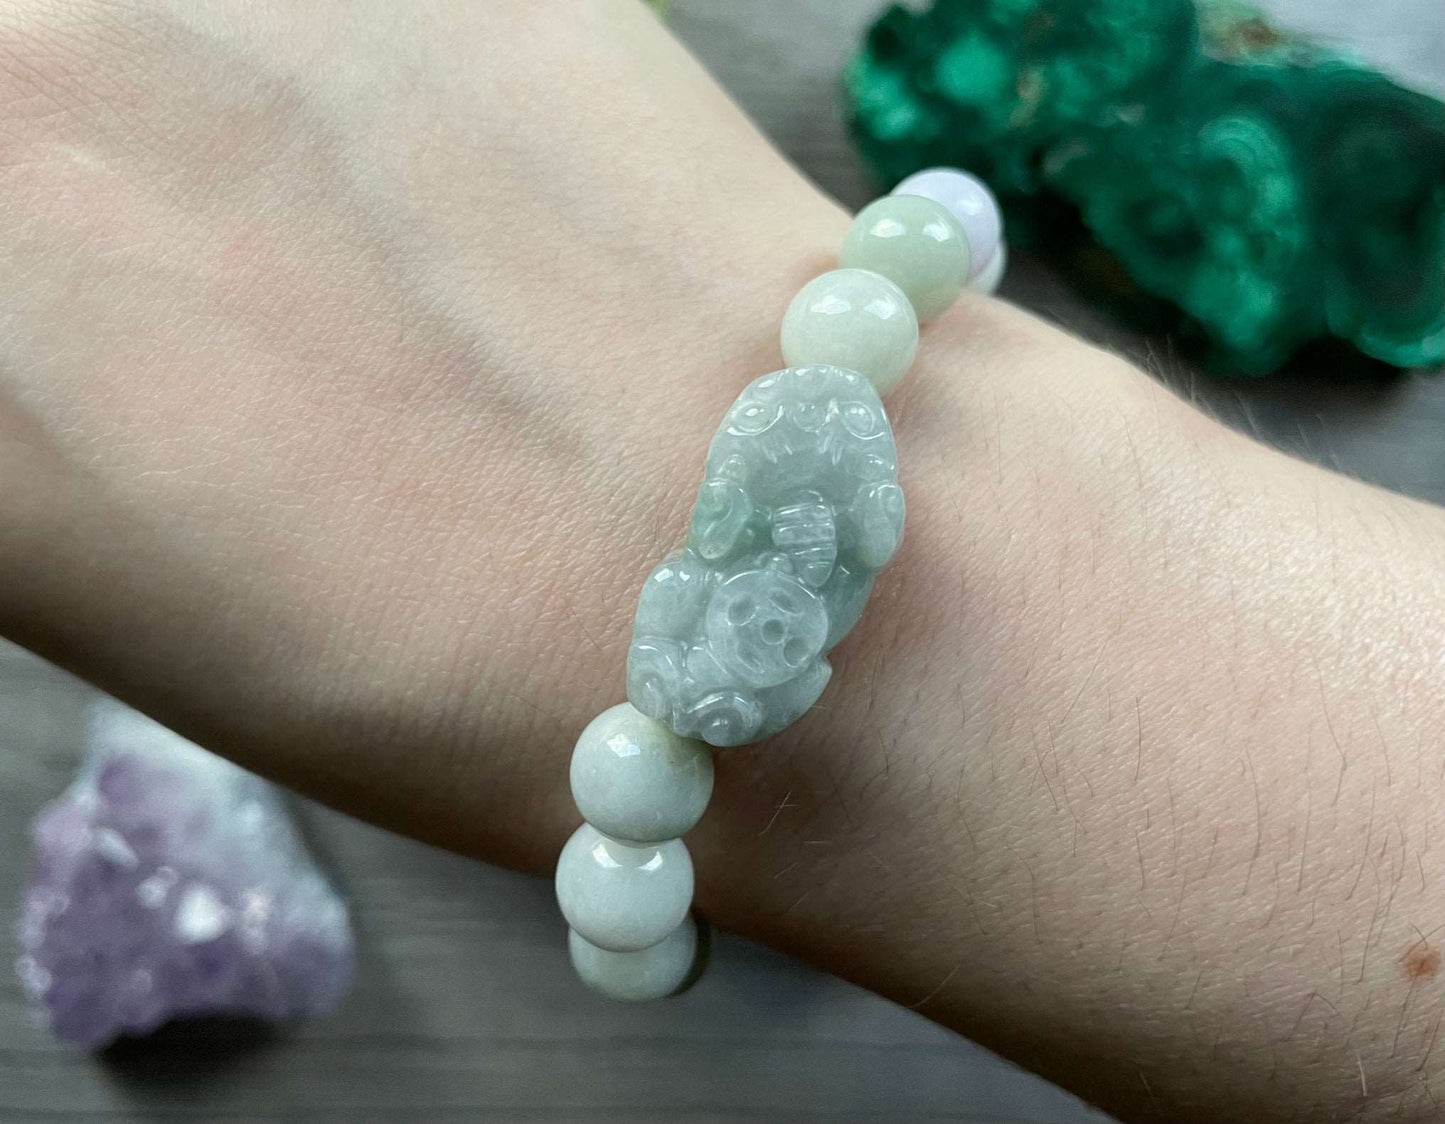 Pictured is a genuine Hetian jade bead bracelet with a large jade bead in the shape of Pixiu in the middle.